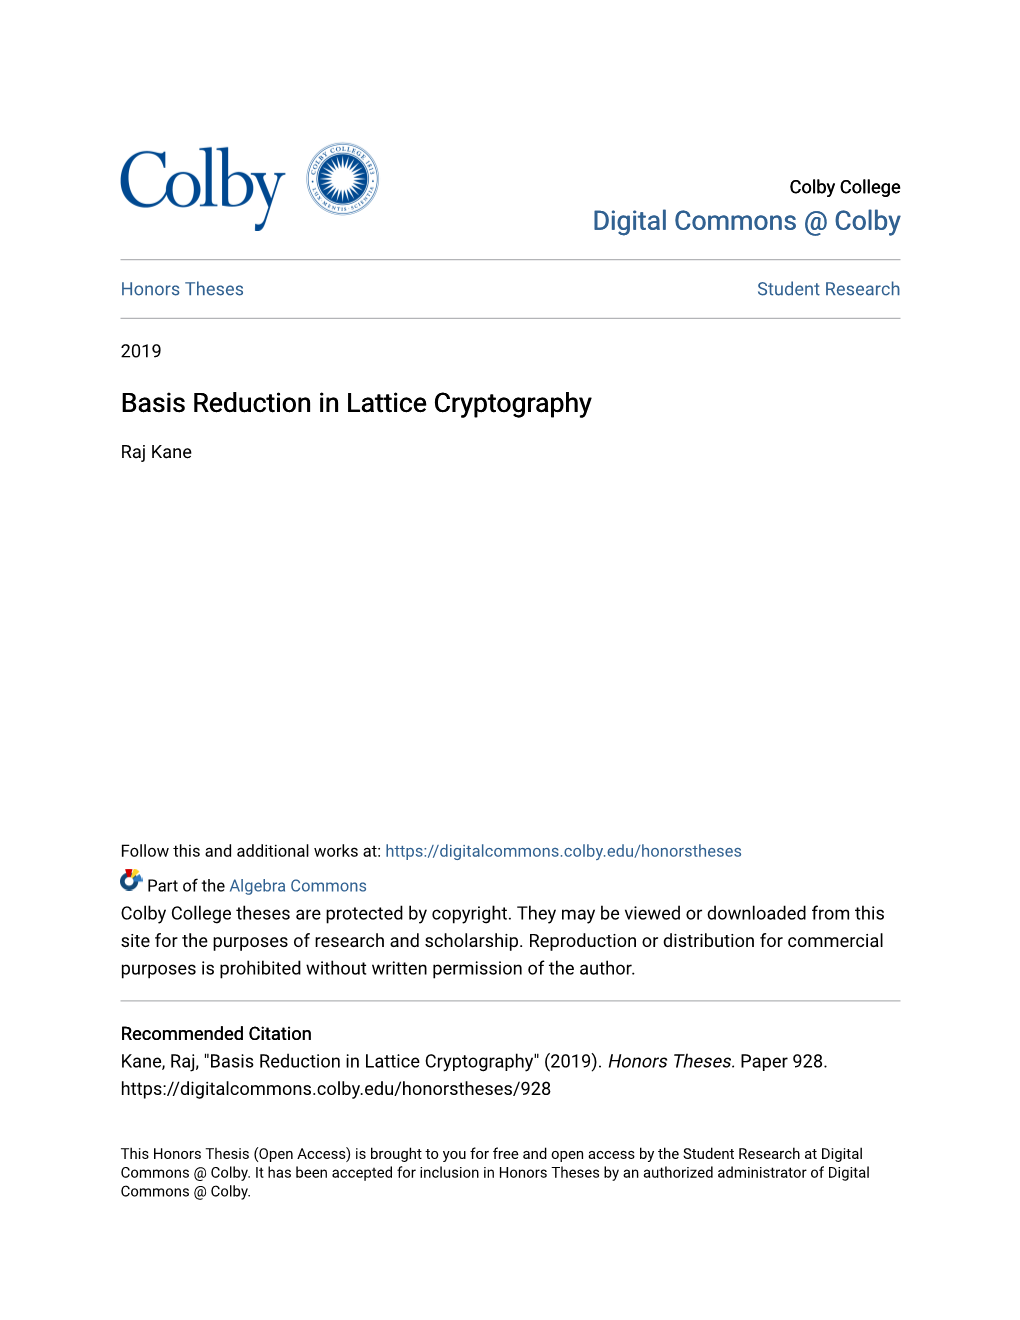 Basis Reduction in Lattice Cryptography